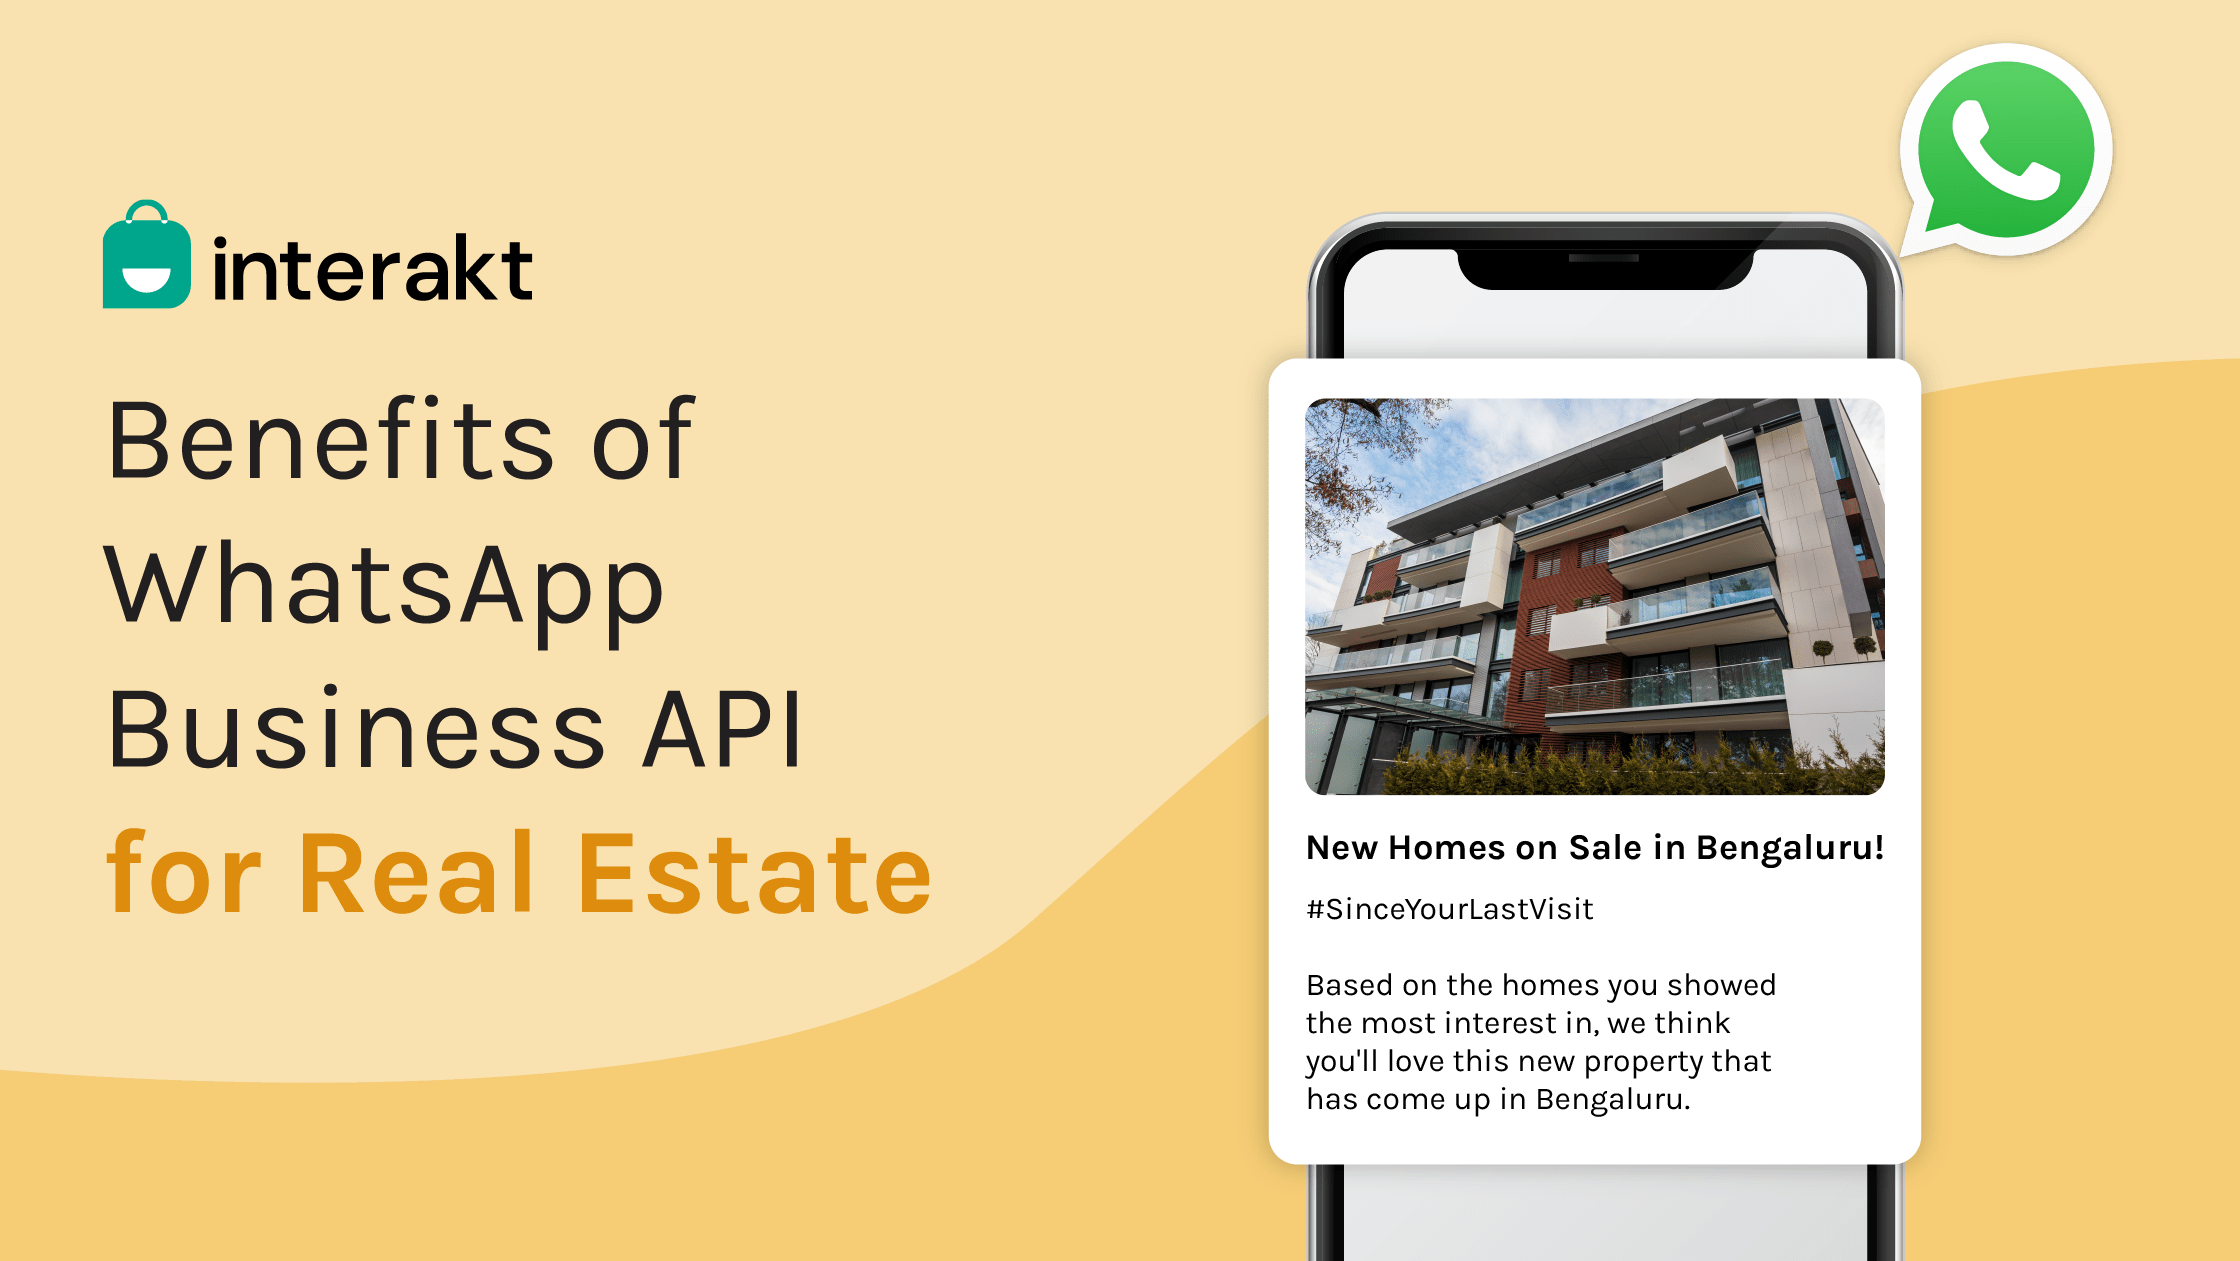 Benefits of WhatsApp Business API for Real Estate